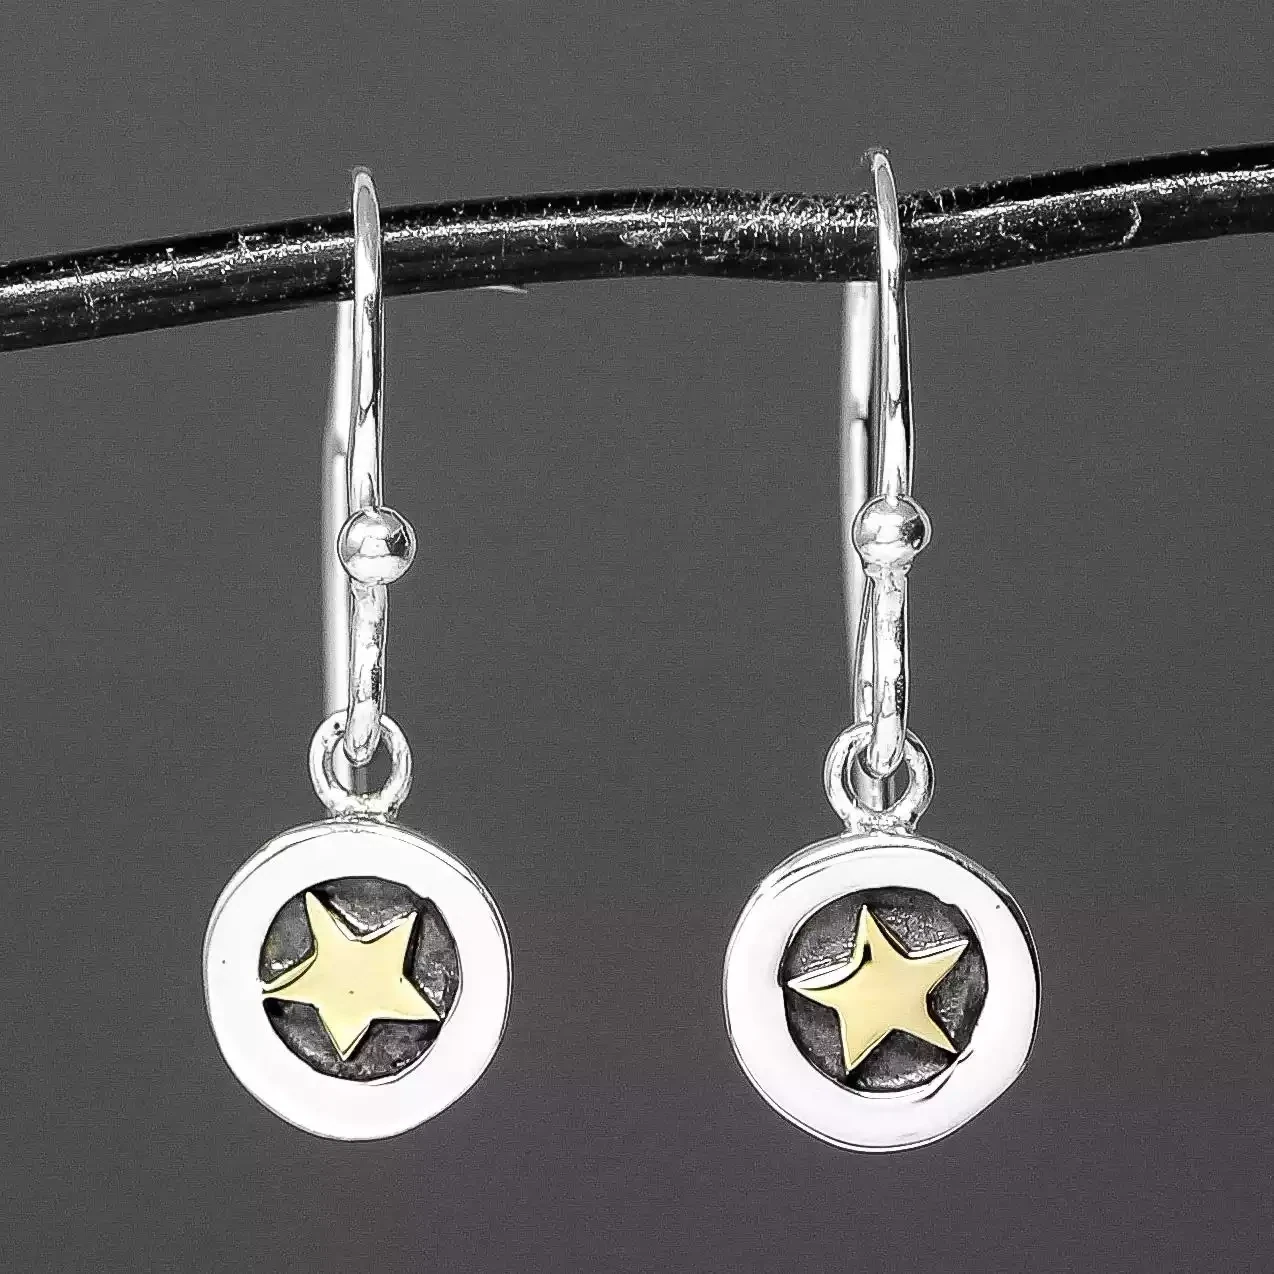 Twilight Star Silver and Gold Drop Earrings - Small by Linda Macdonald